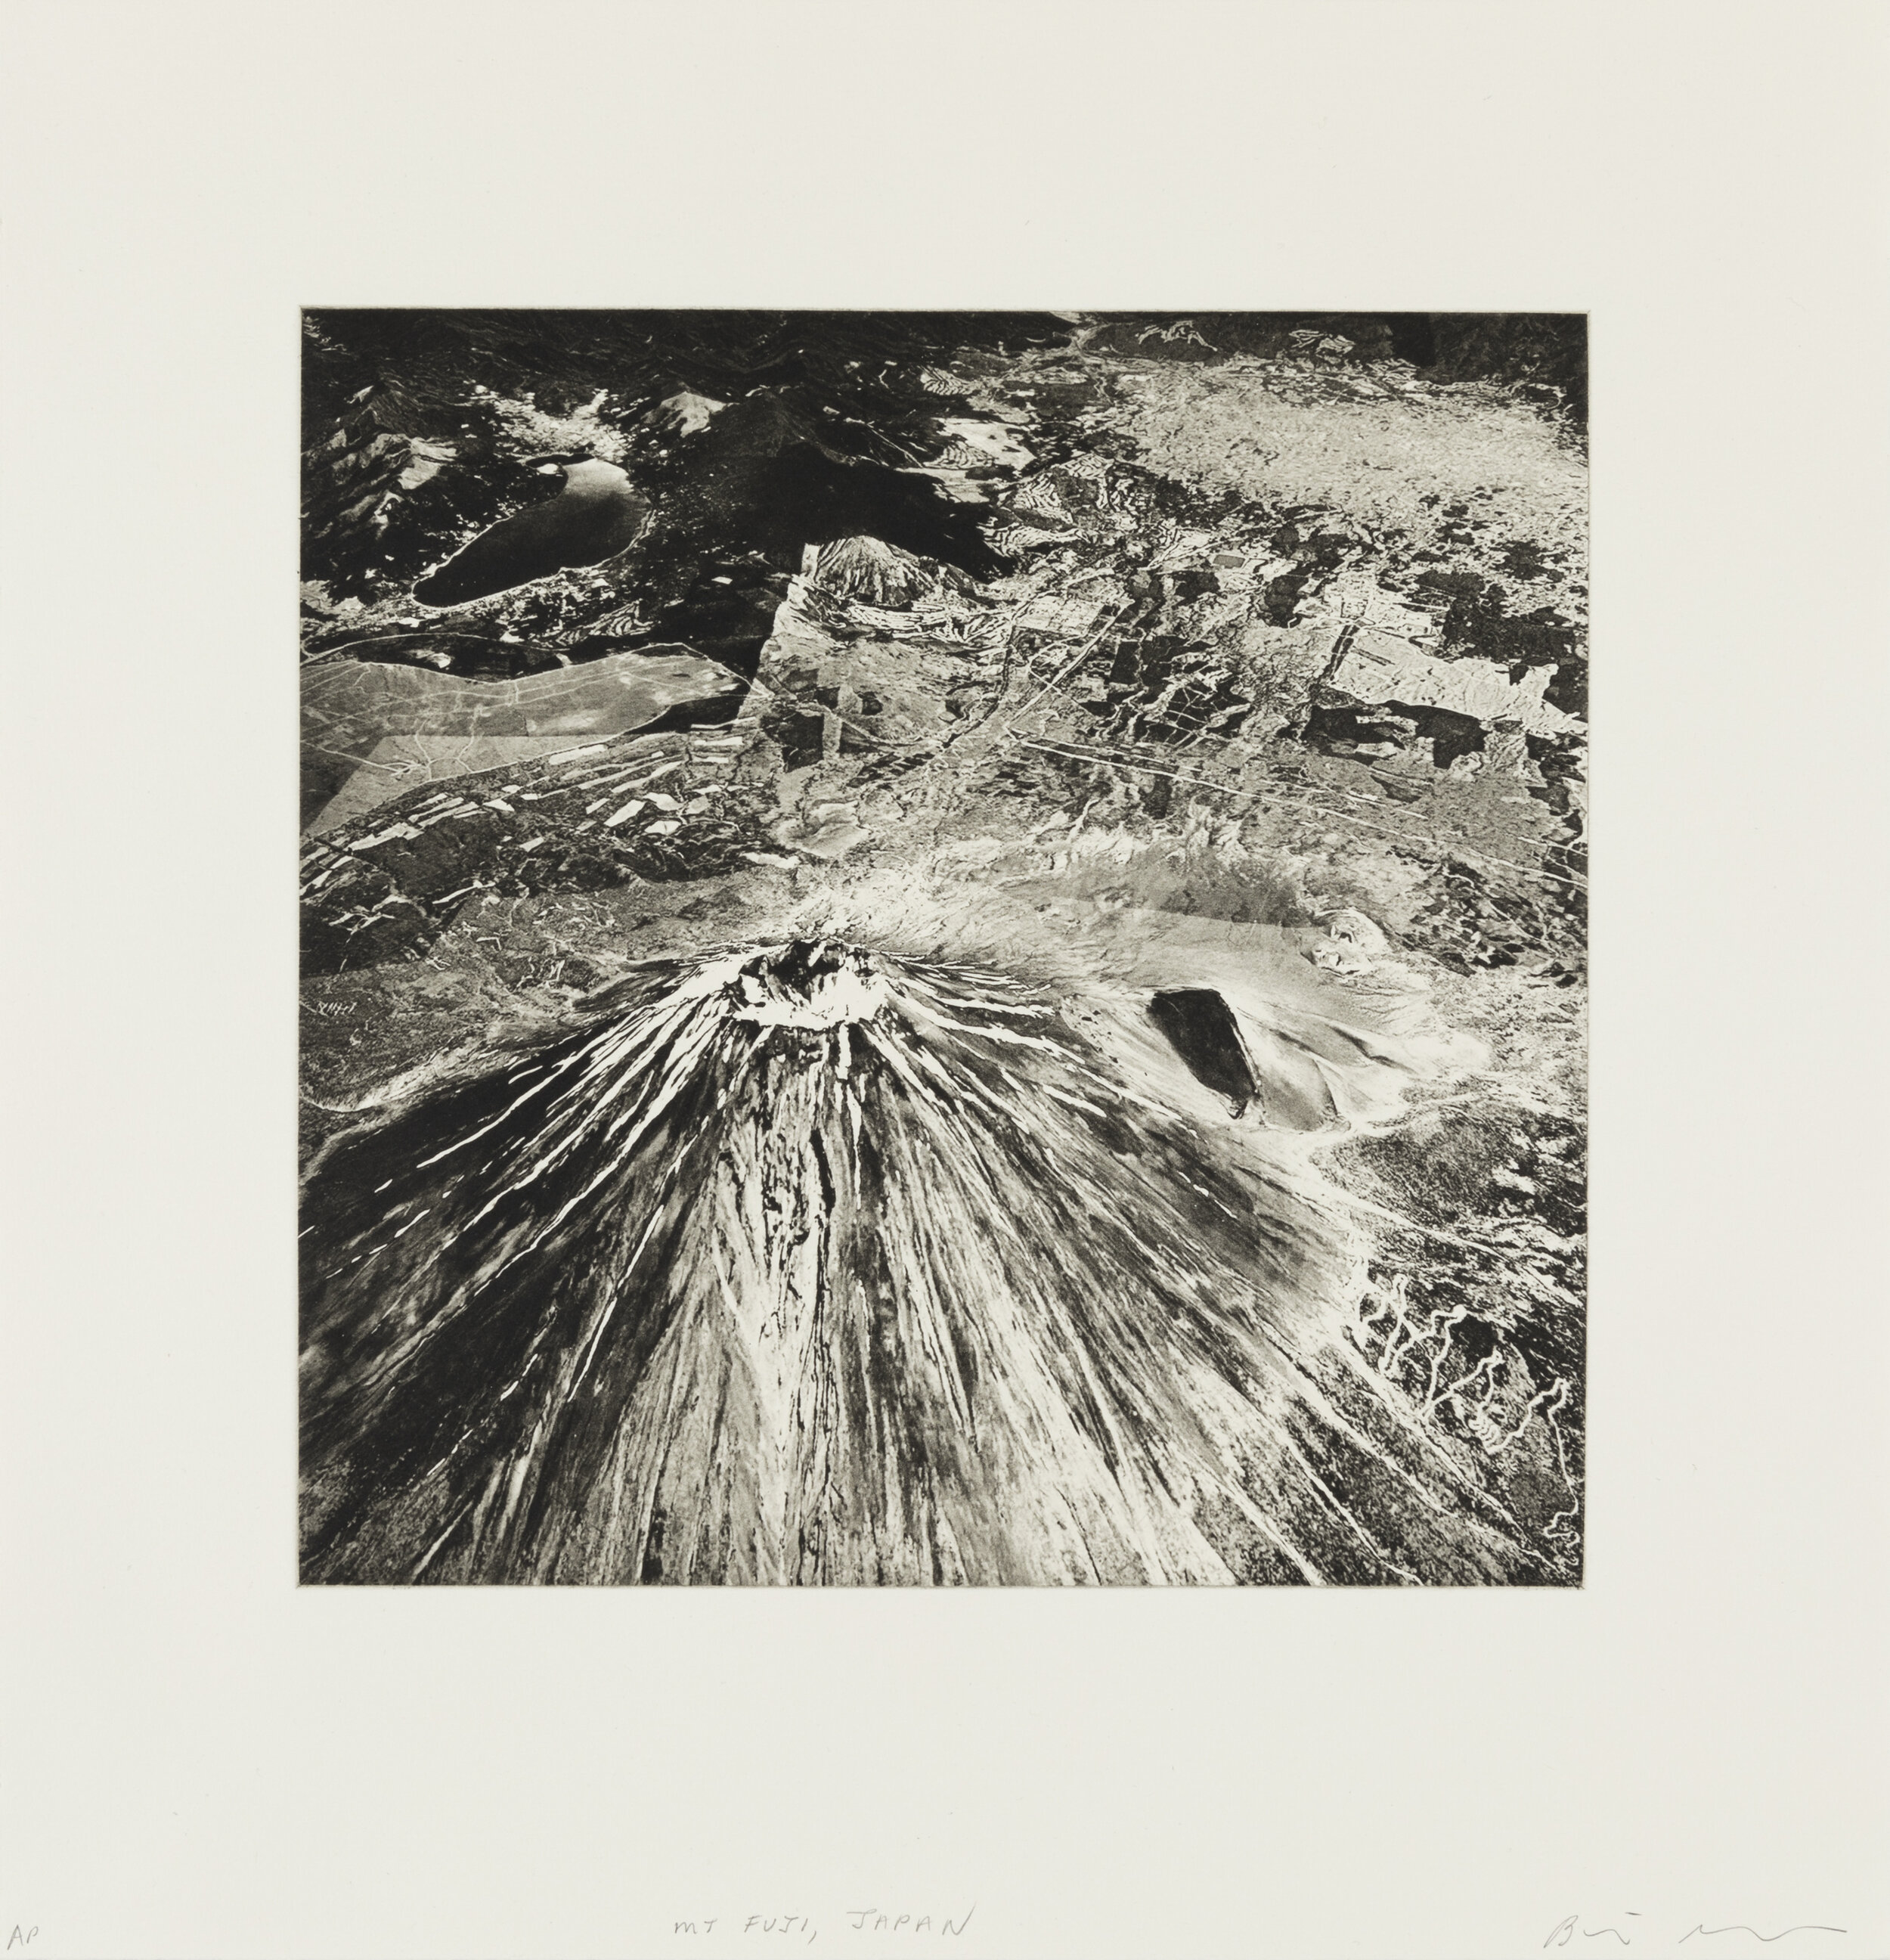    Mount Fuji, Japan, 2019     Copperplate photogravure etching on cotton rag paper, plate size; 10.6” x 10.6”, paper size; 16” x 15.5”, edition 10  